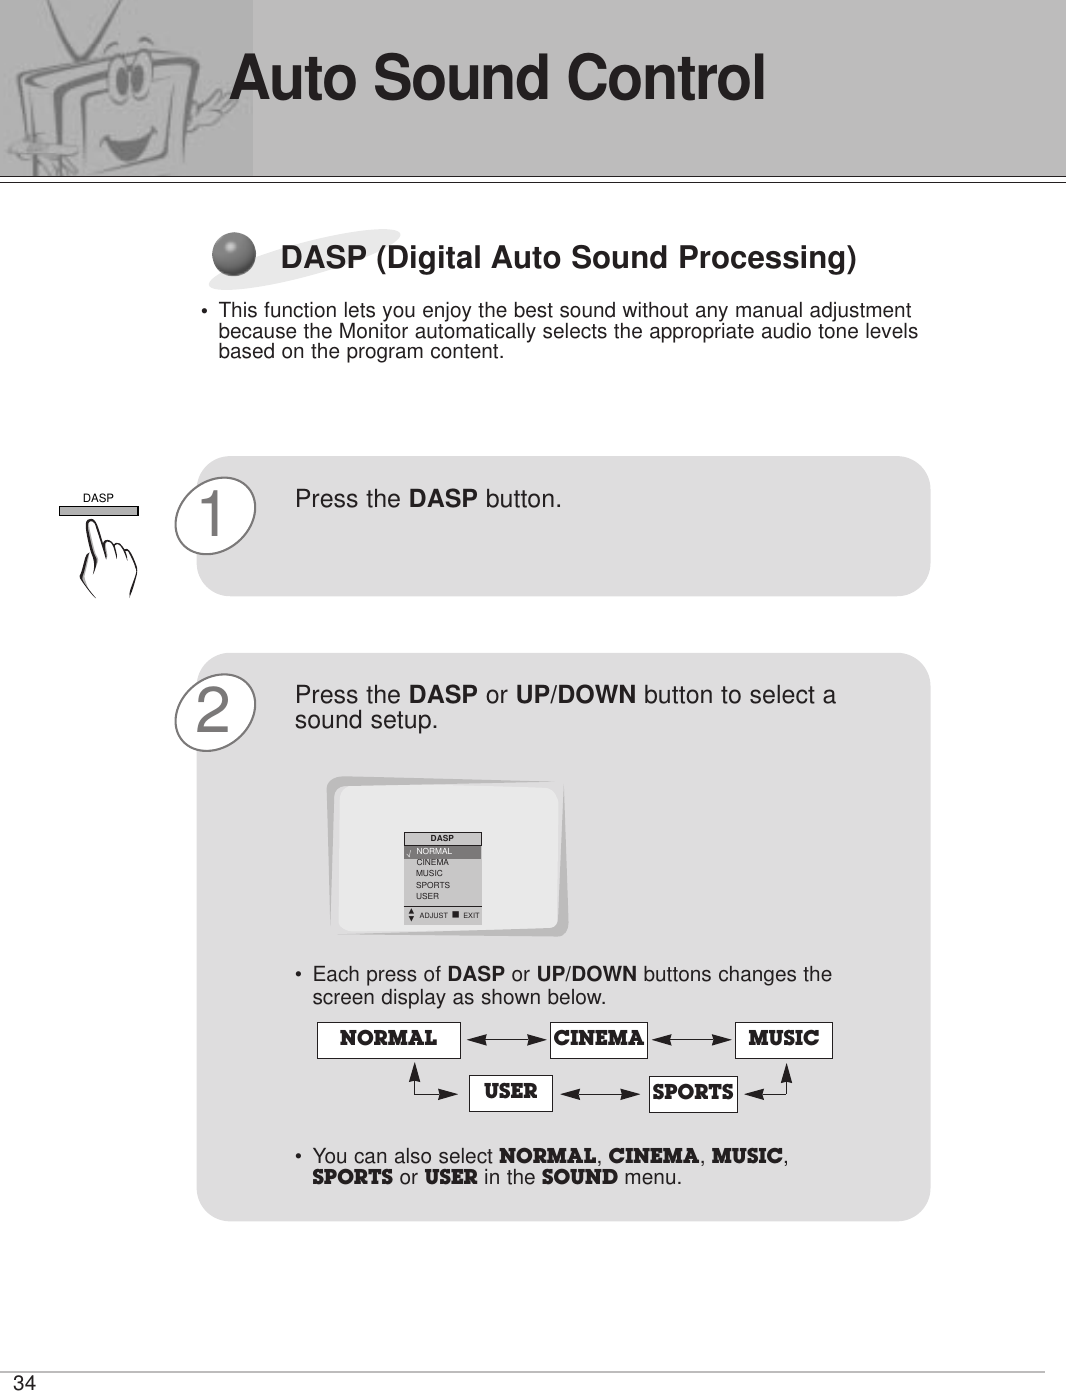 34Auto Sound ControlDASP (Digital Auto Sound Processing)•This function lets you enjoy the best sound without any manual adjustmentbecause the Monitor automatically selects the appropriate audio tone levelsbased on the program content.1Press the DASP button. 2Press the DASP or UP/DOWN button to select asound setup.•Each press of DASP or UP/DOWN buttons changes thescreen display as shown below.• You can also select NORMAL, CINEMA, MUSIC,SPORTS or USER in the SOUND menu. NORMAL CINEMAUSERMUSICSPORTSDASPNORMALCINEMAMUSICSPORTSUSERDASPDEADJUST A EXITNORMAL